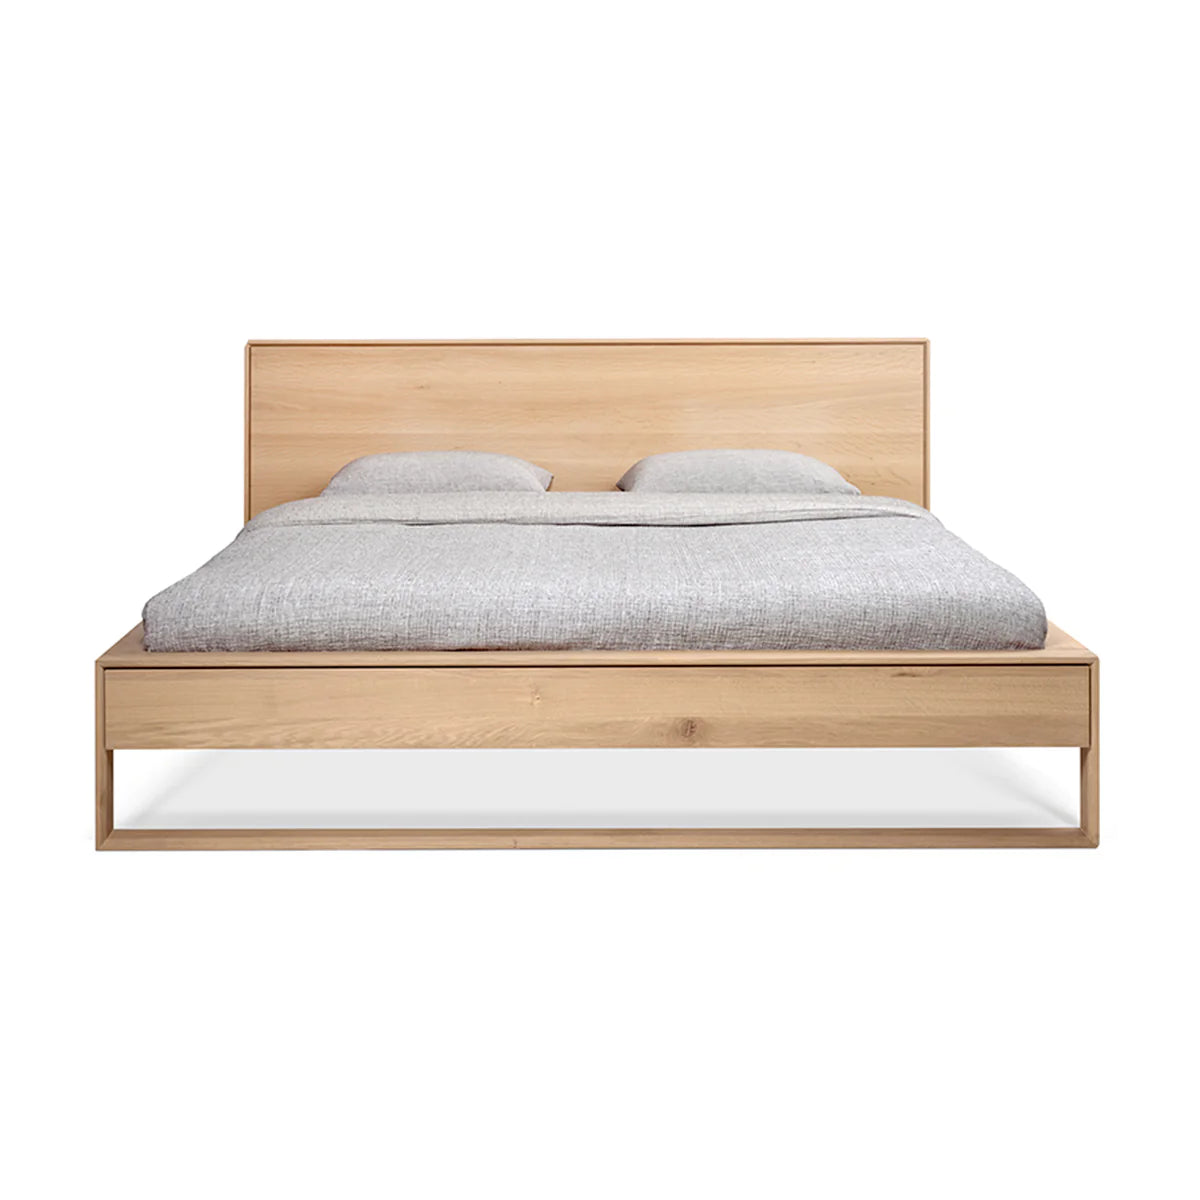 Ethnicraft Oak Nordic ll Queen Bed is available from Make Your House A Home, Bendigo, Victoria, Australia